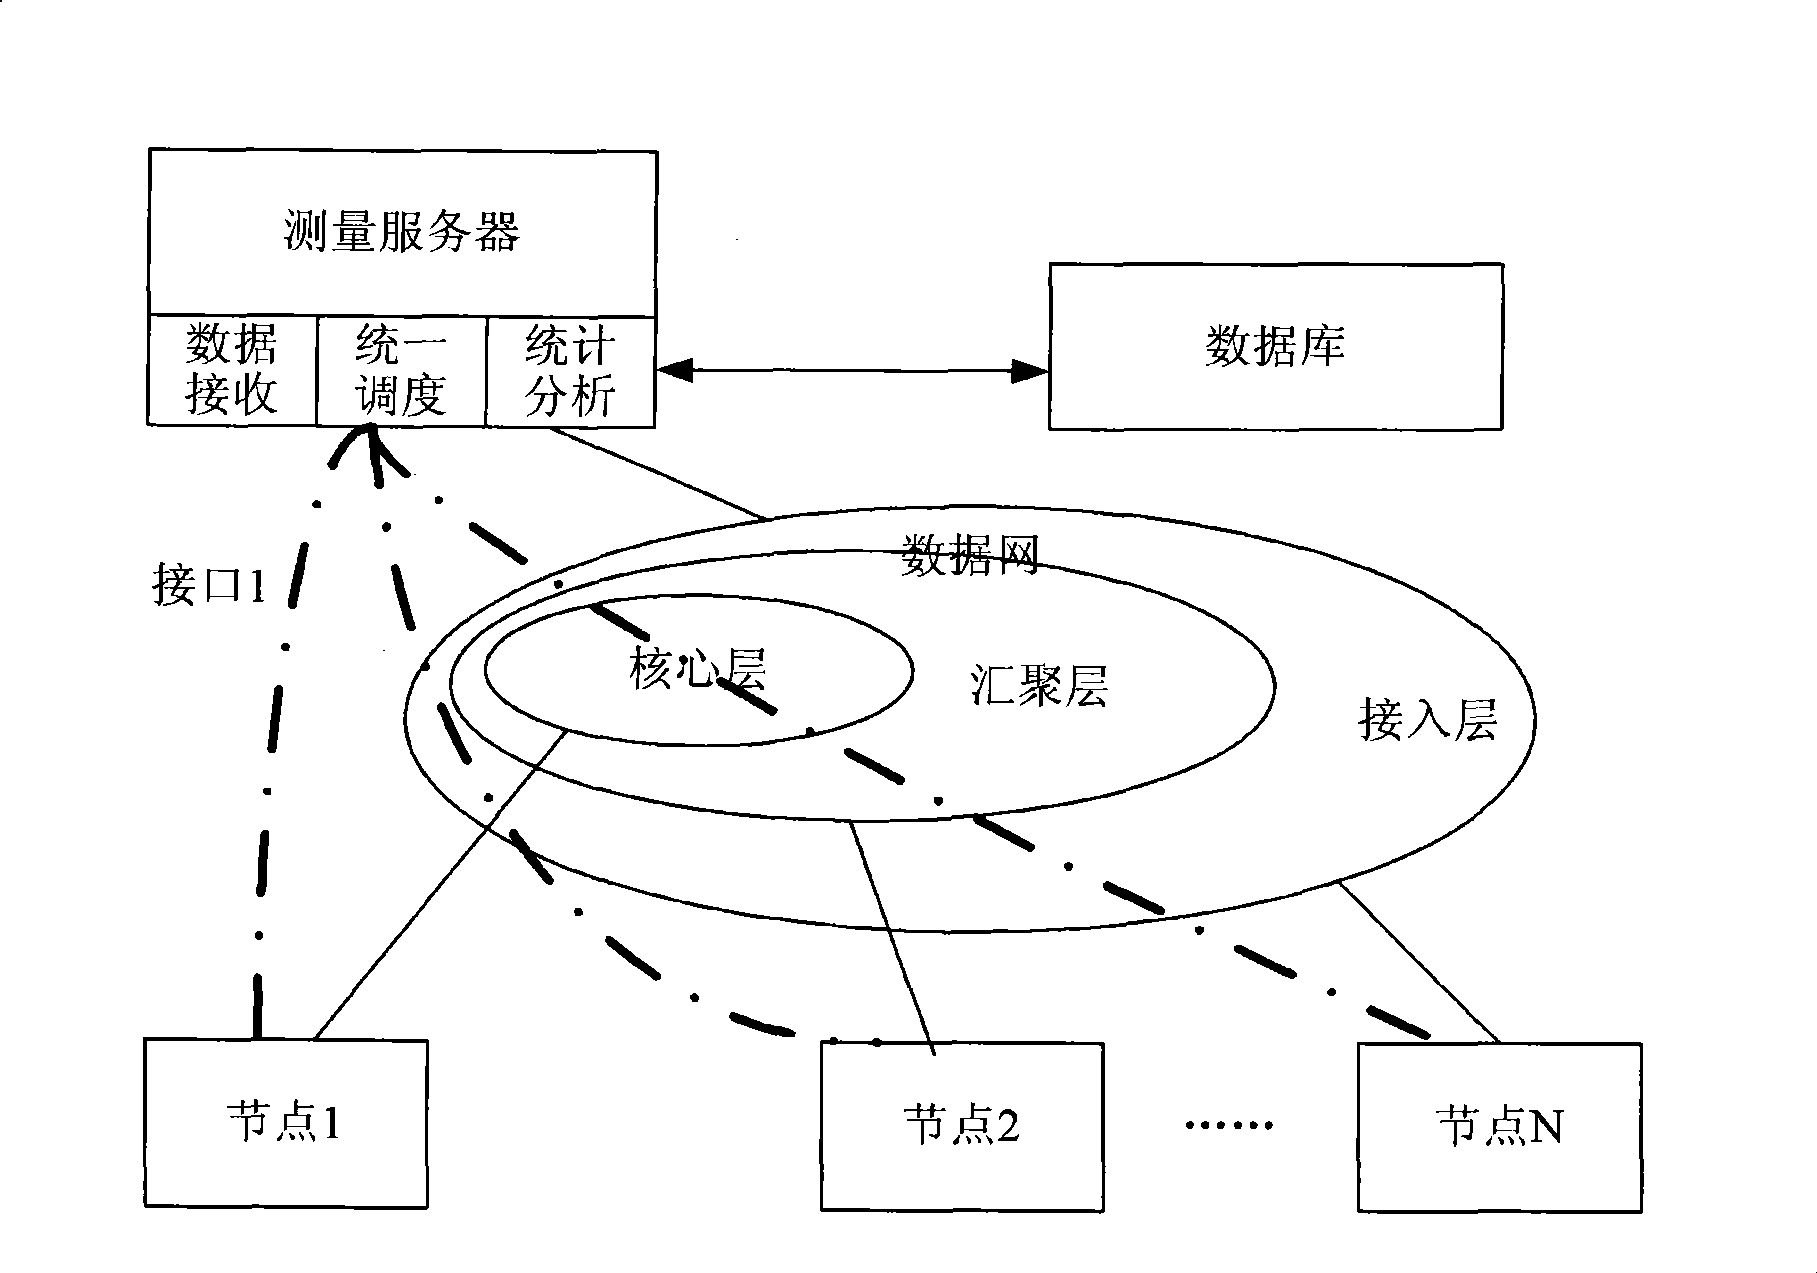 Method and system for network service quality measurement